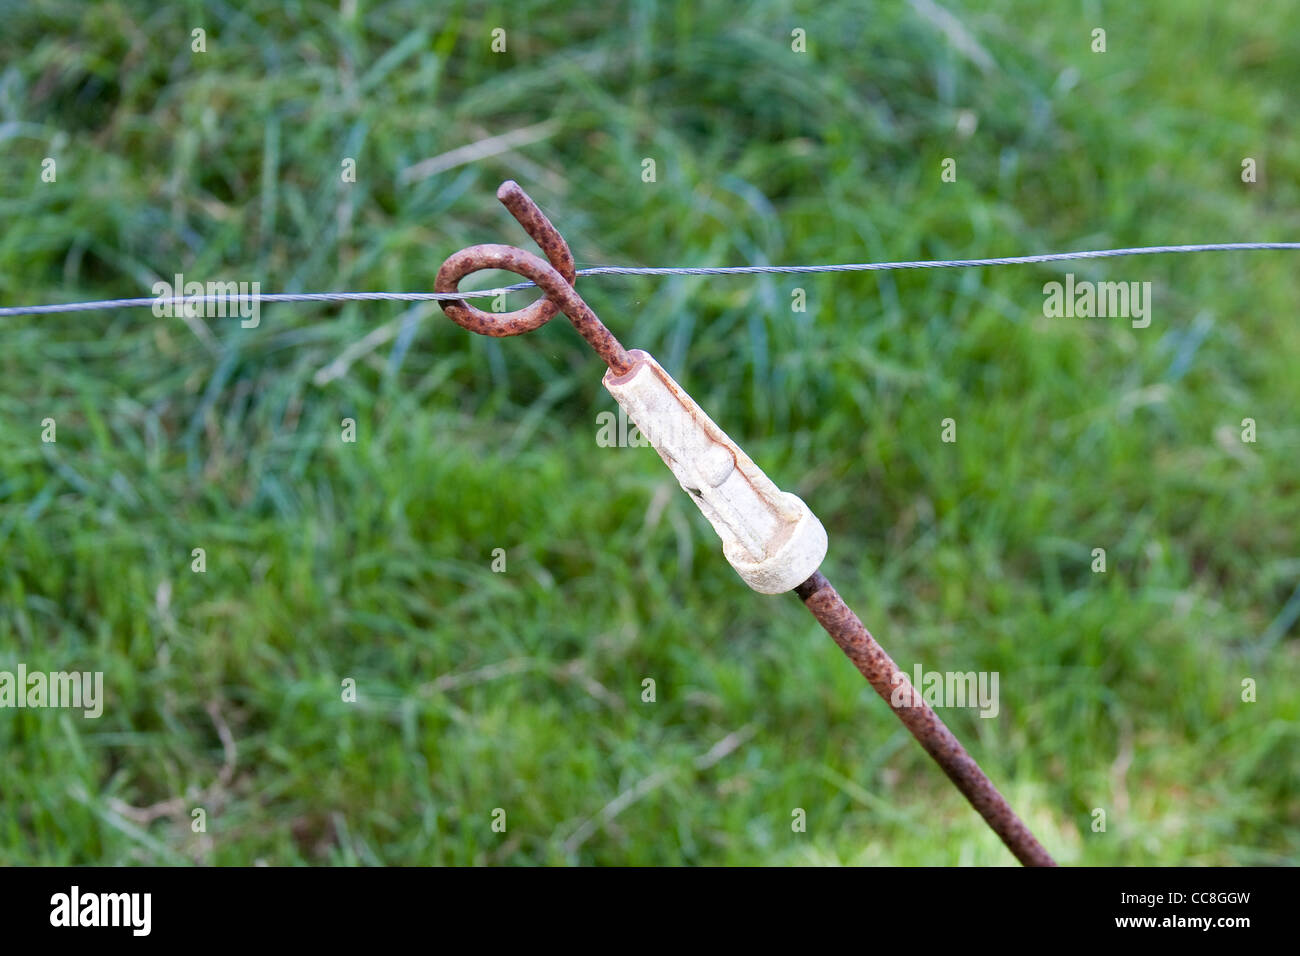 Detail of Electric Fence Wire with Rusty Support Rod and White Insulator Stock Photo